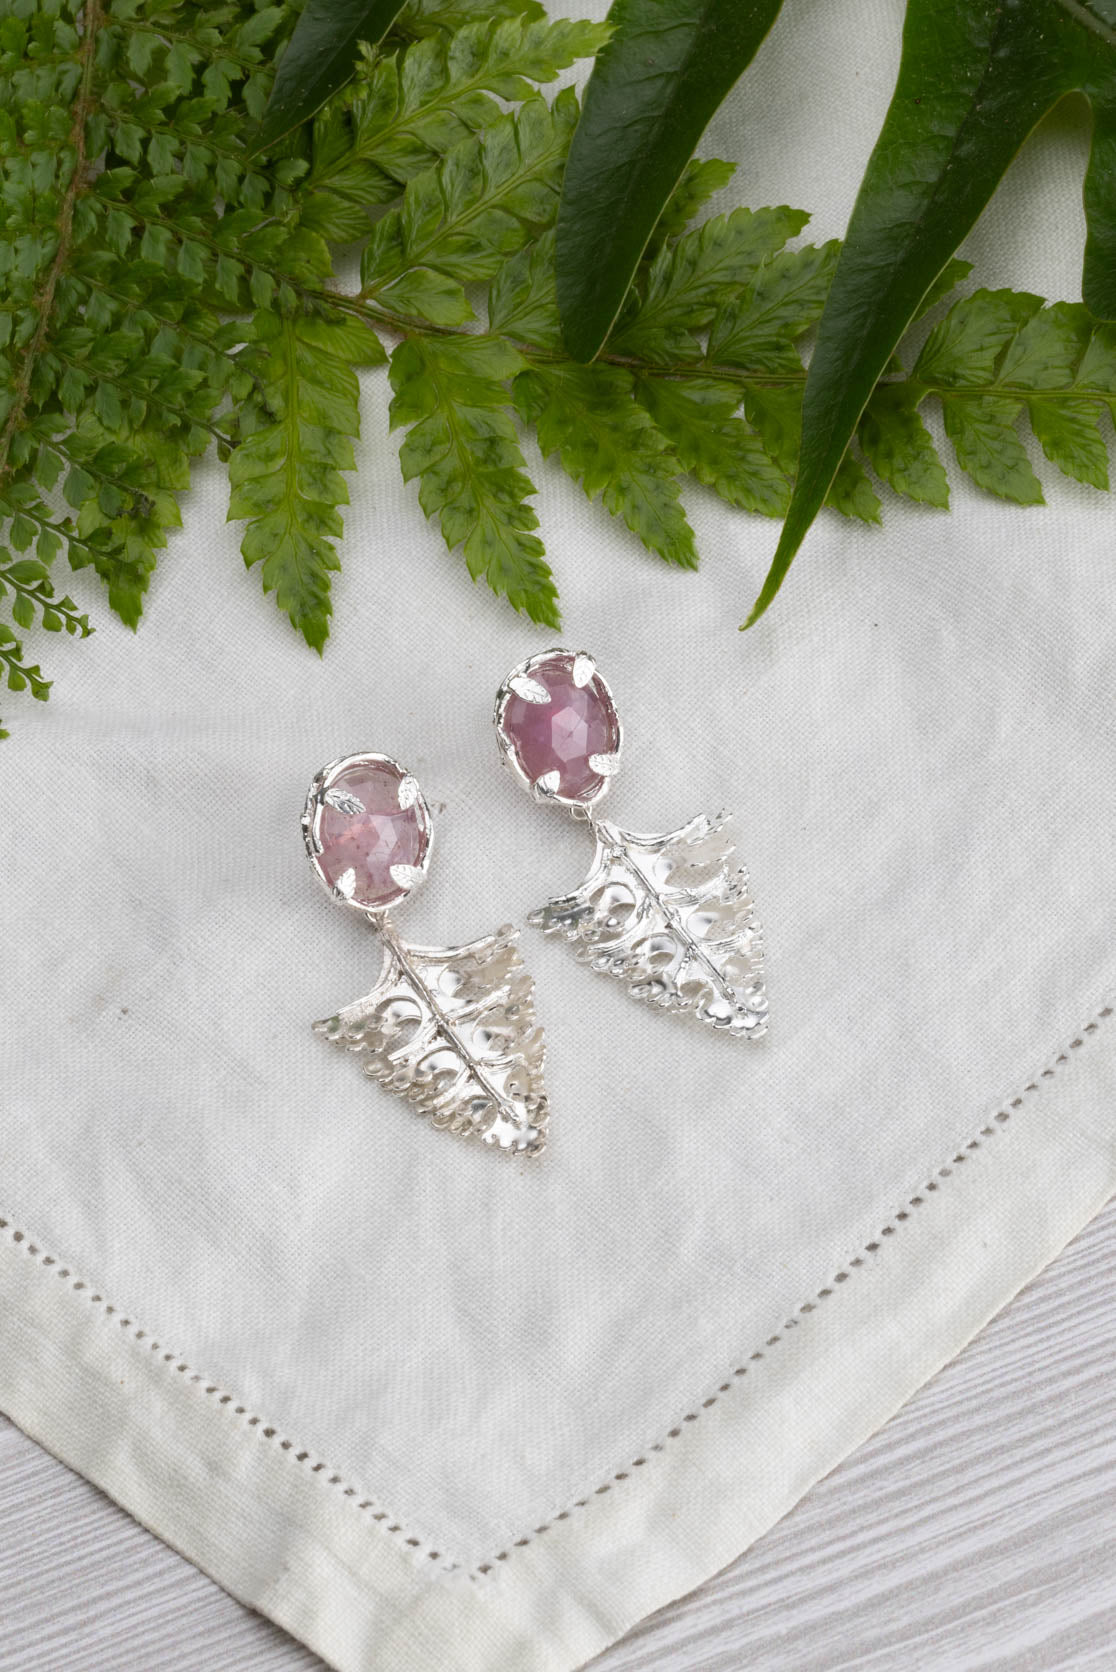 Botanical Nest Earrings With Arts And Crafts Leaf Drop